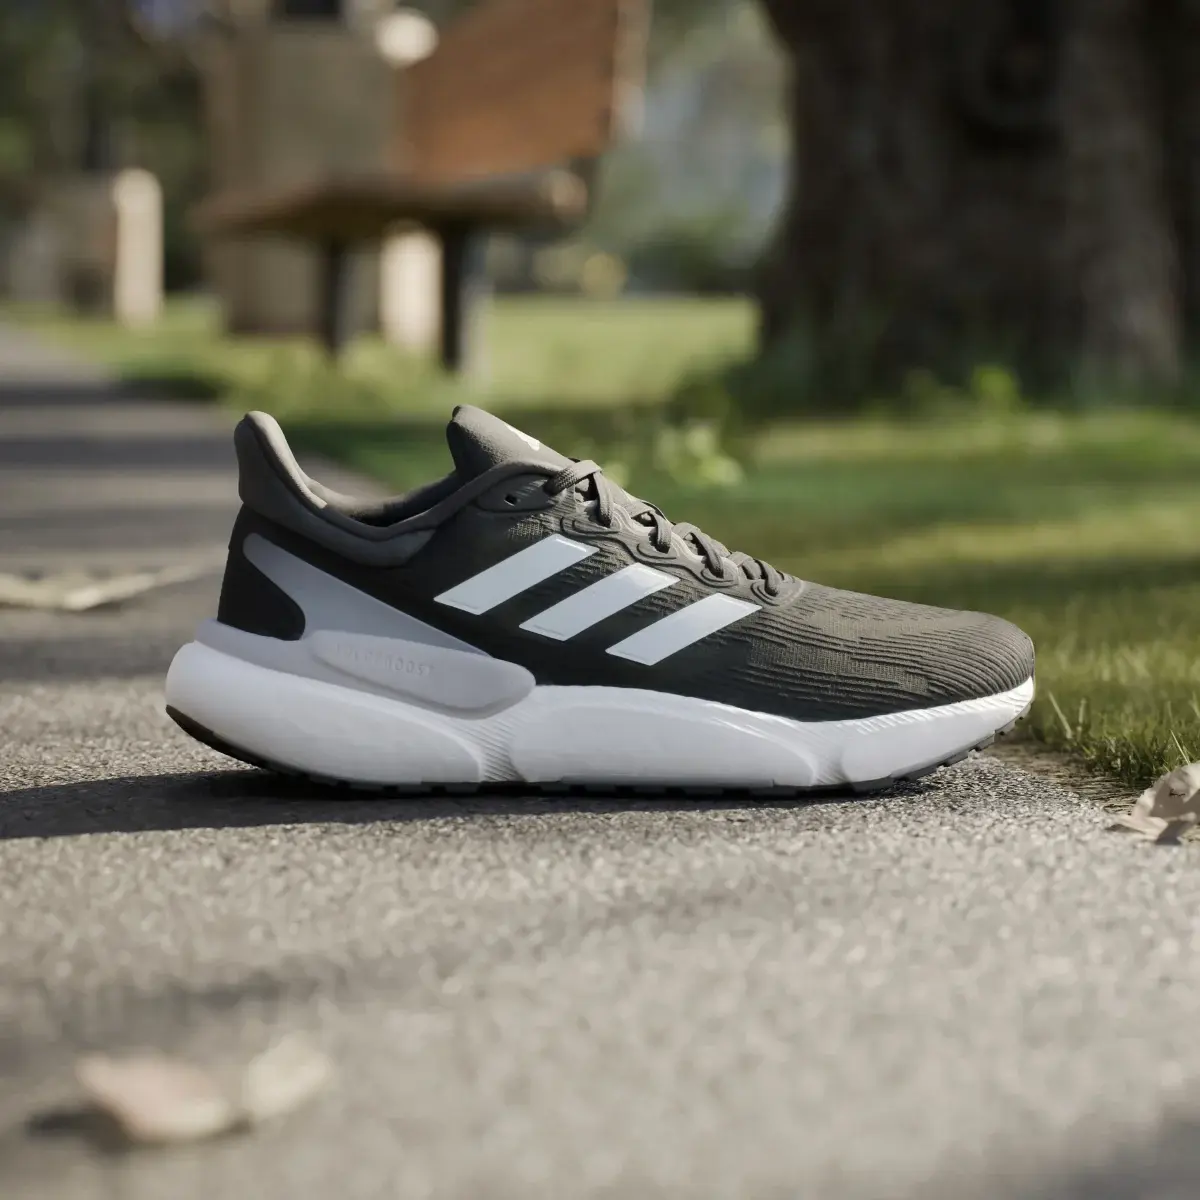 Adidas Solarboost 5 Shoes. 2